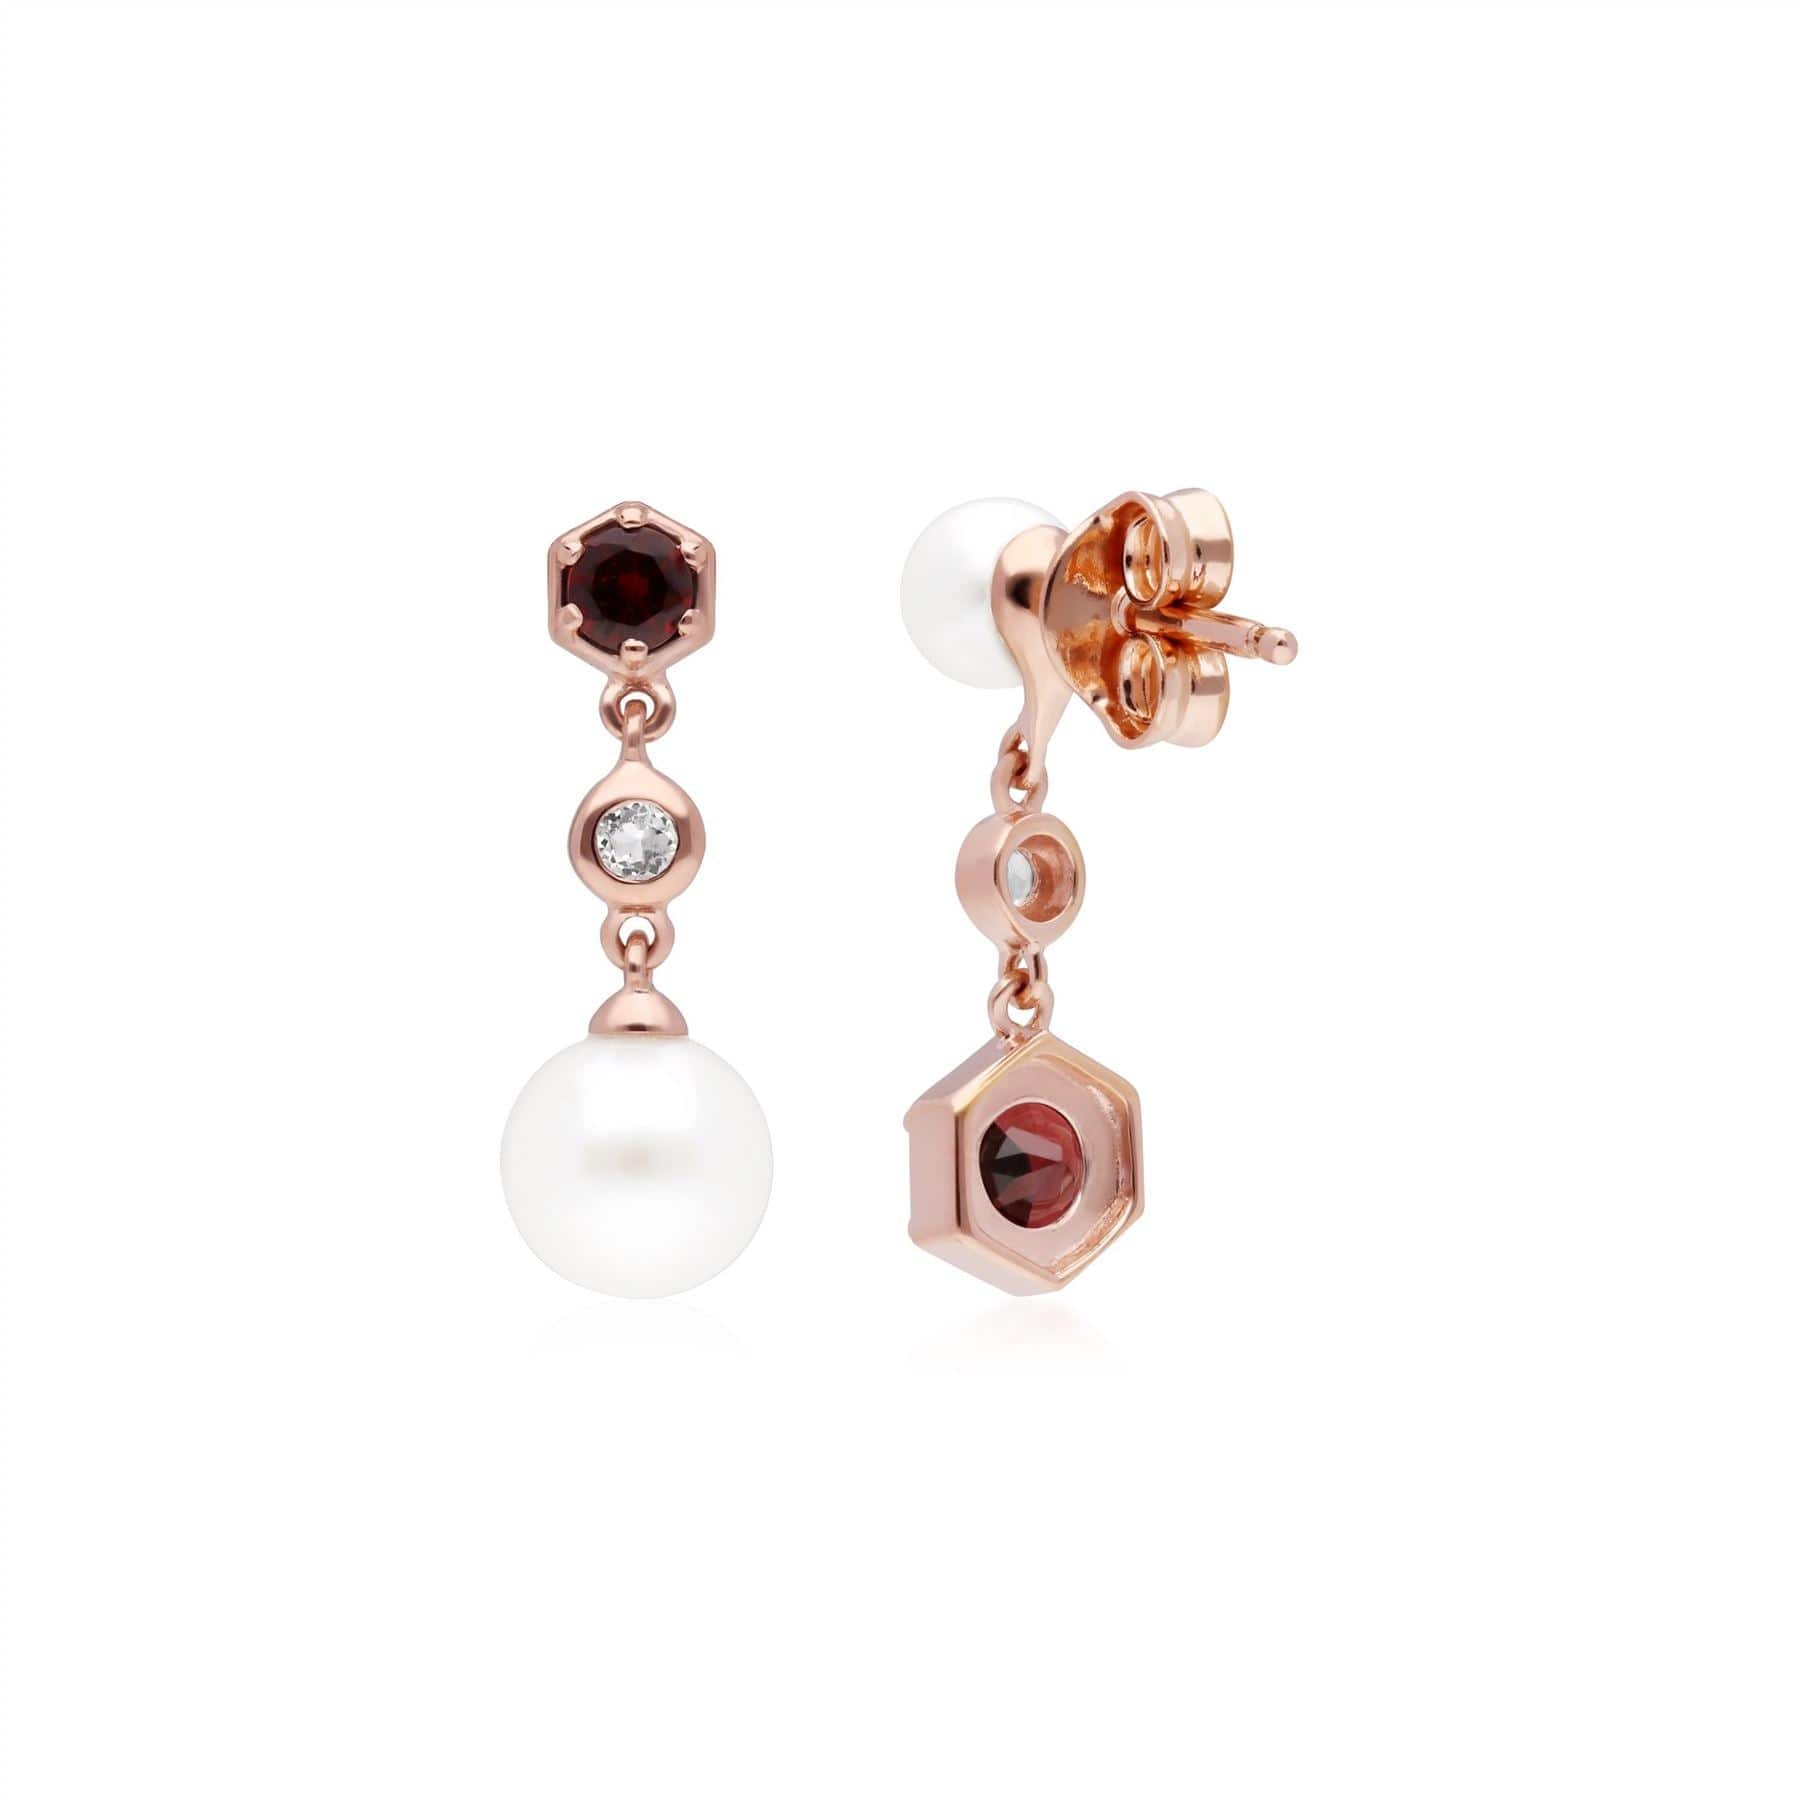 Modern Pearl, Garnet & Topaz Mismatched Drop Earrings in Rose Gold Plated Sterling Silver